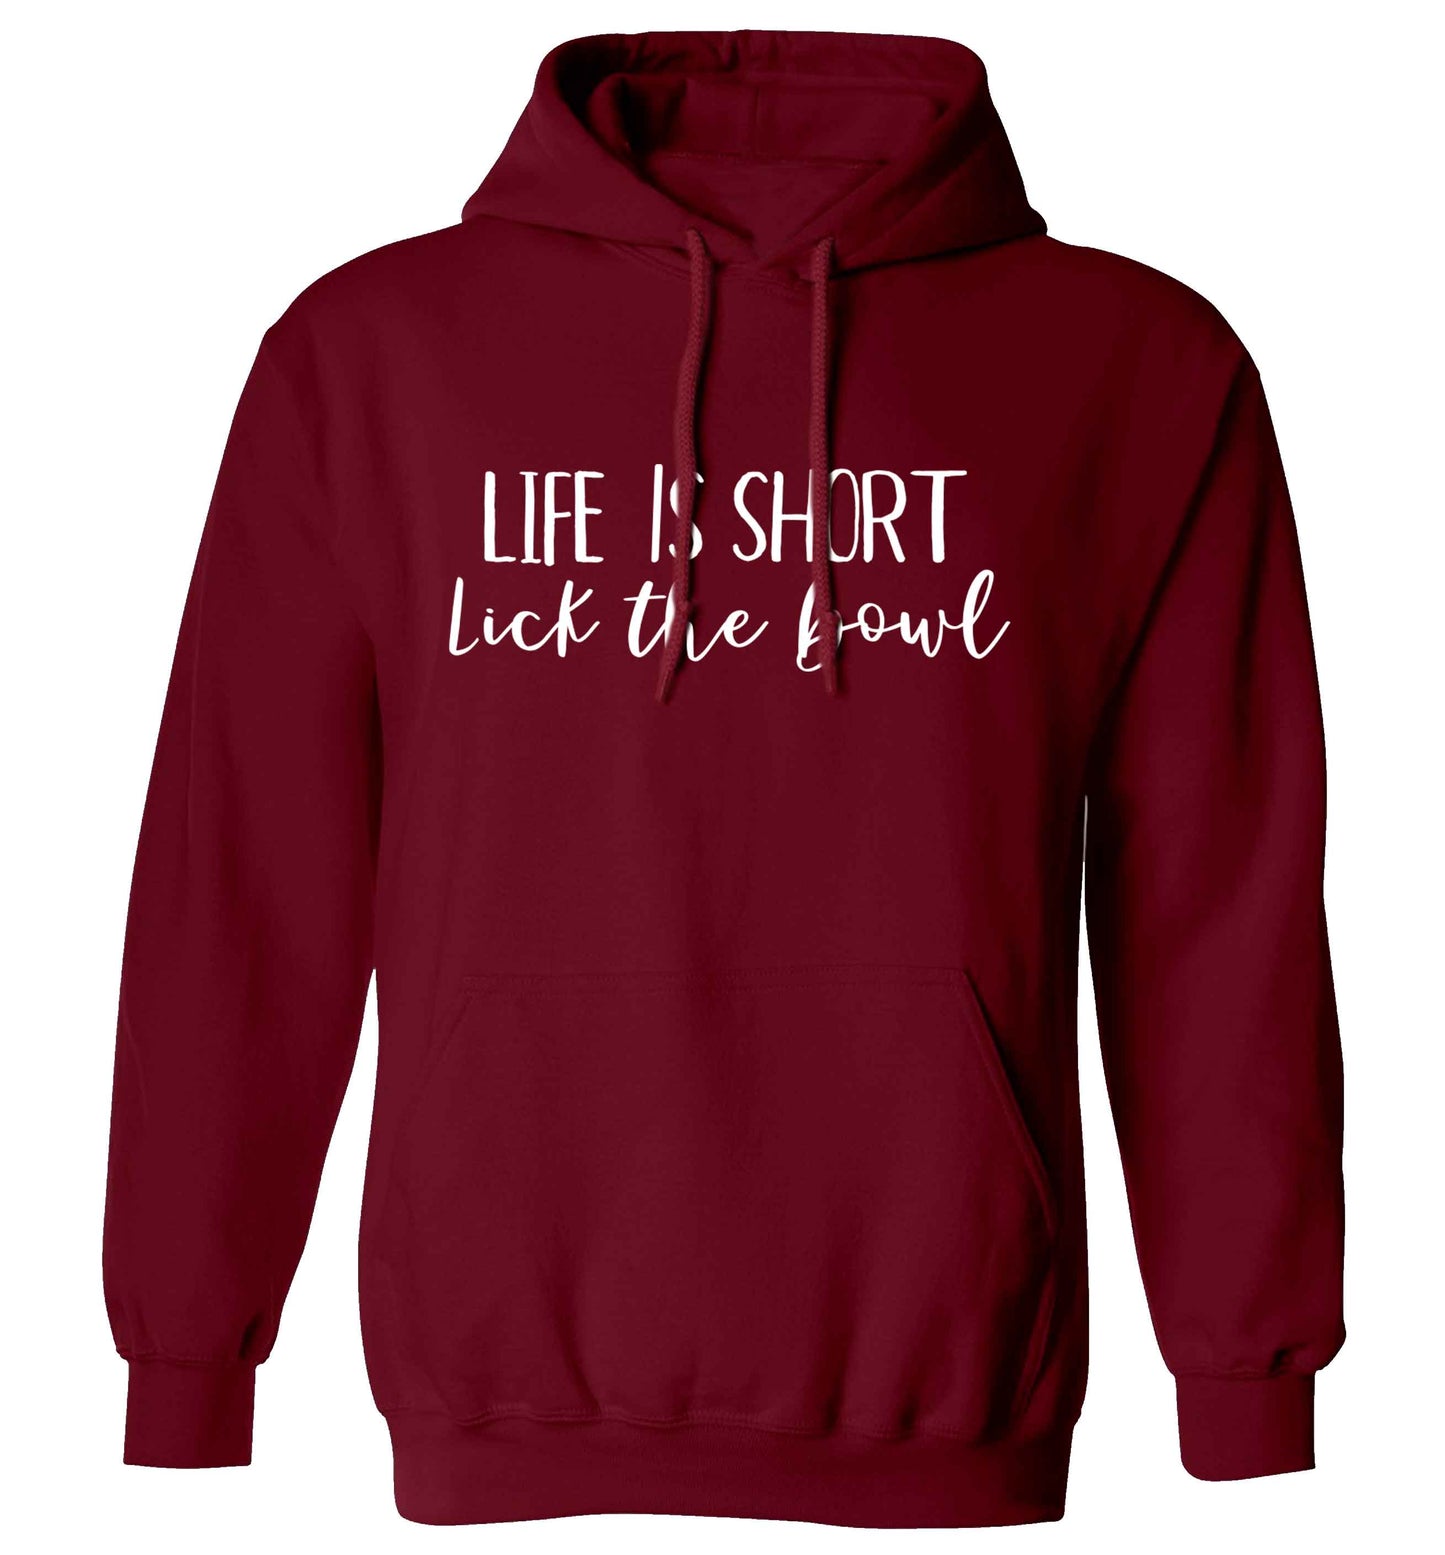 Life is short lick the bowl adults unisex maroon hoodie 2XL